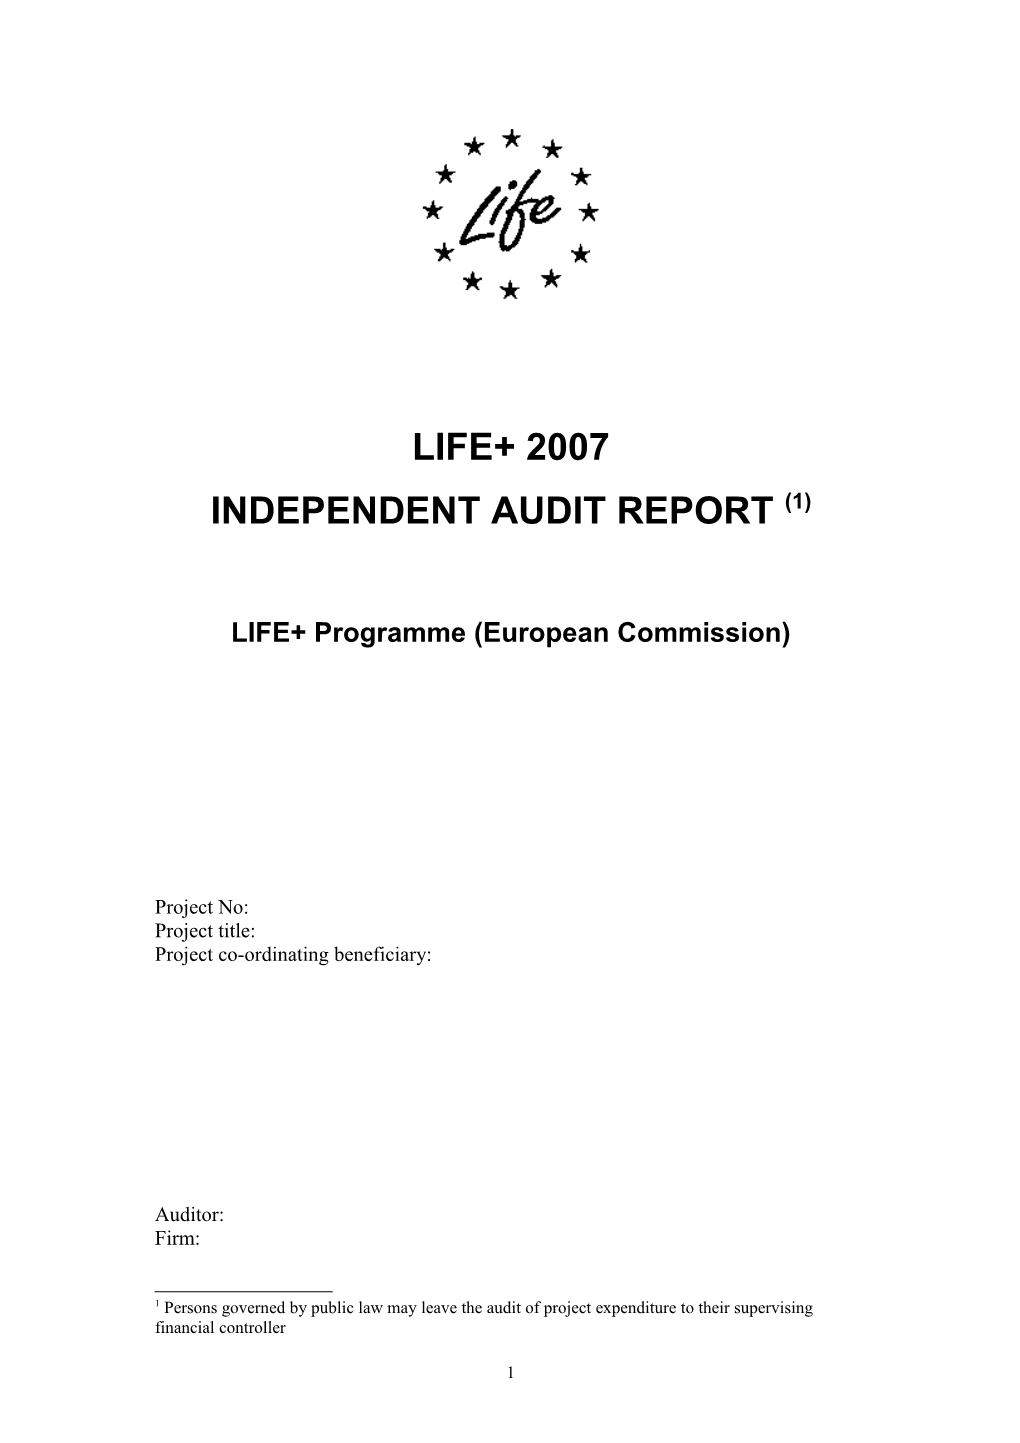 Ndependent Audit Report